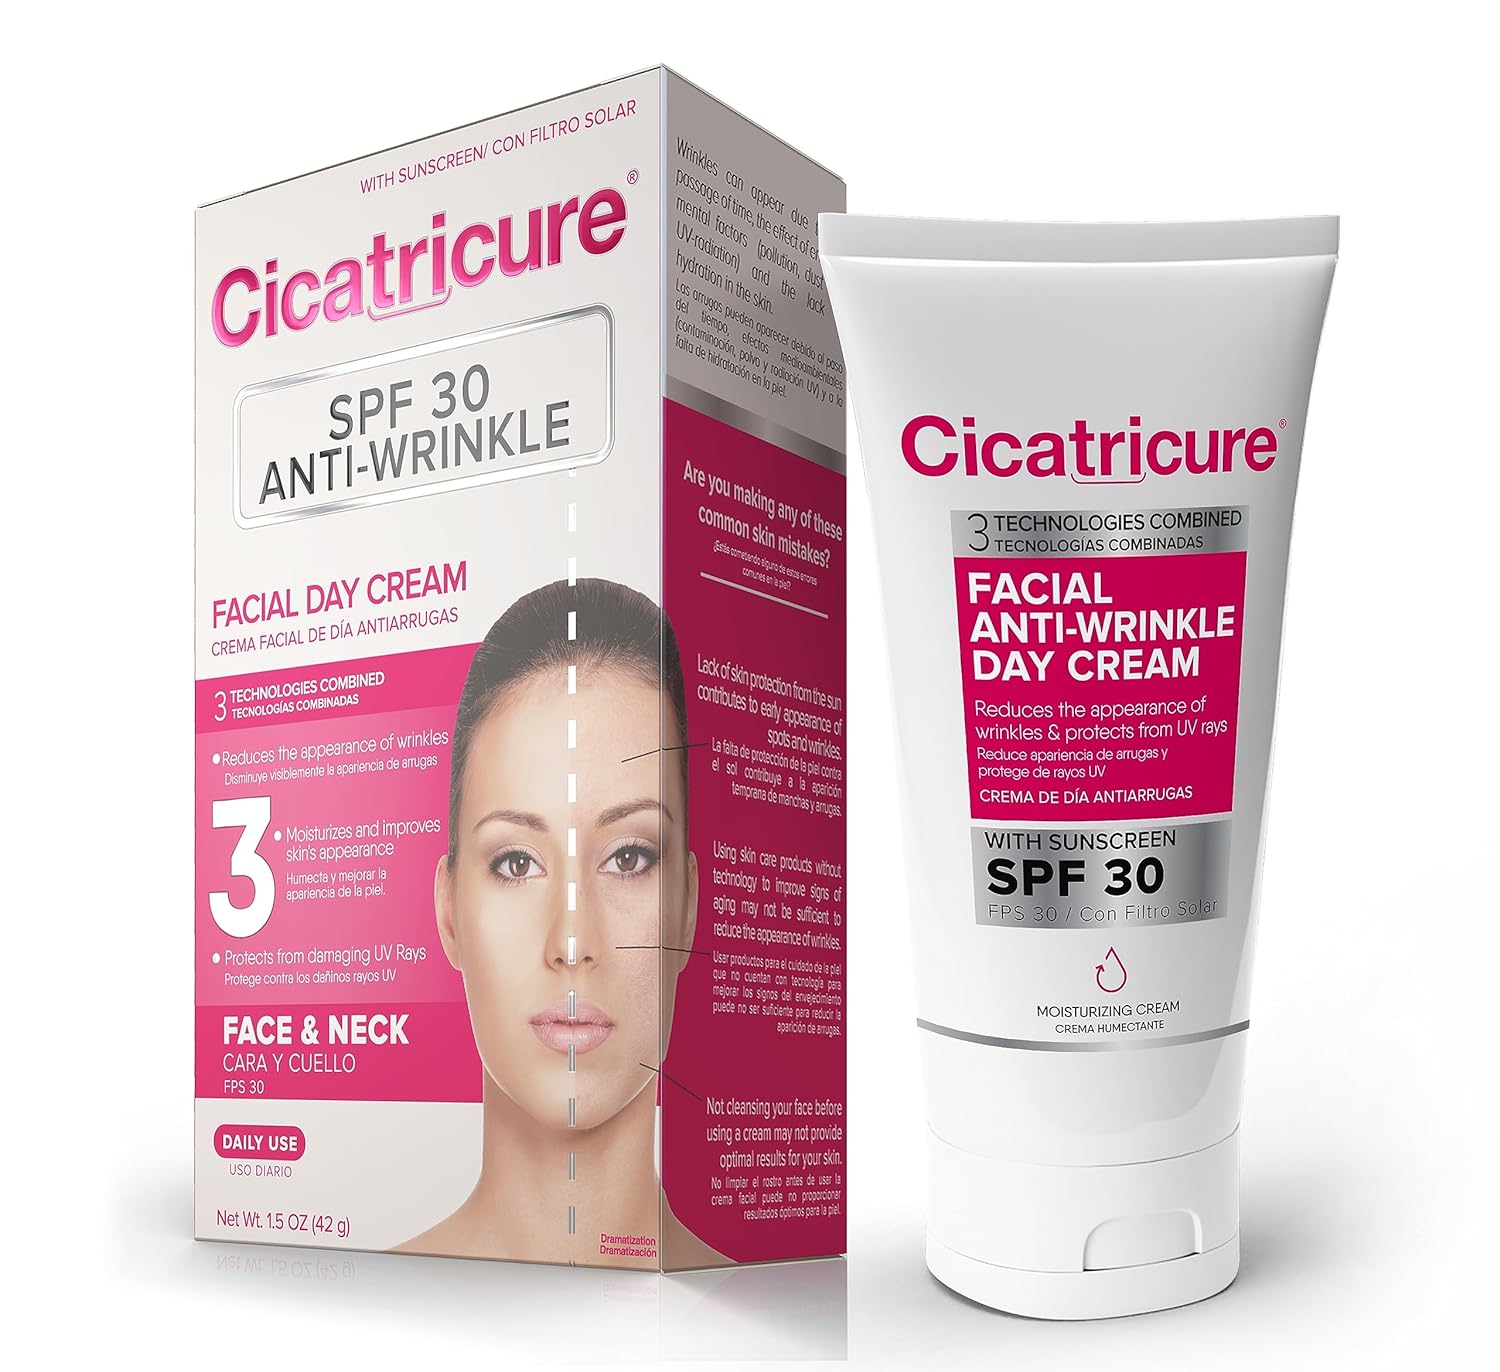 Cicatricure Advanced Face Cream for Fine Lines & Wrinkles, SPF 30, Anti Aging Facial Moisturizer, Daily Skin Care to Enhance Firmness & Elasticity, 1.5